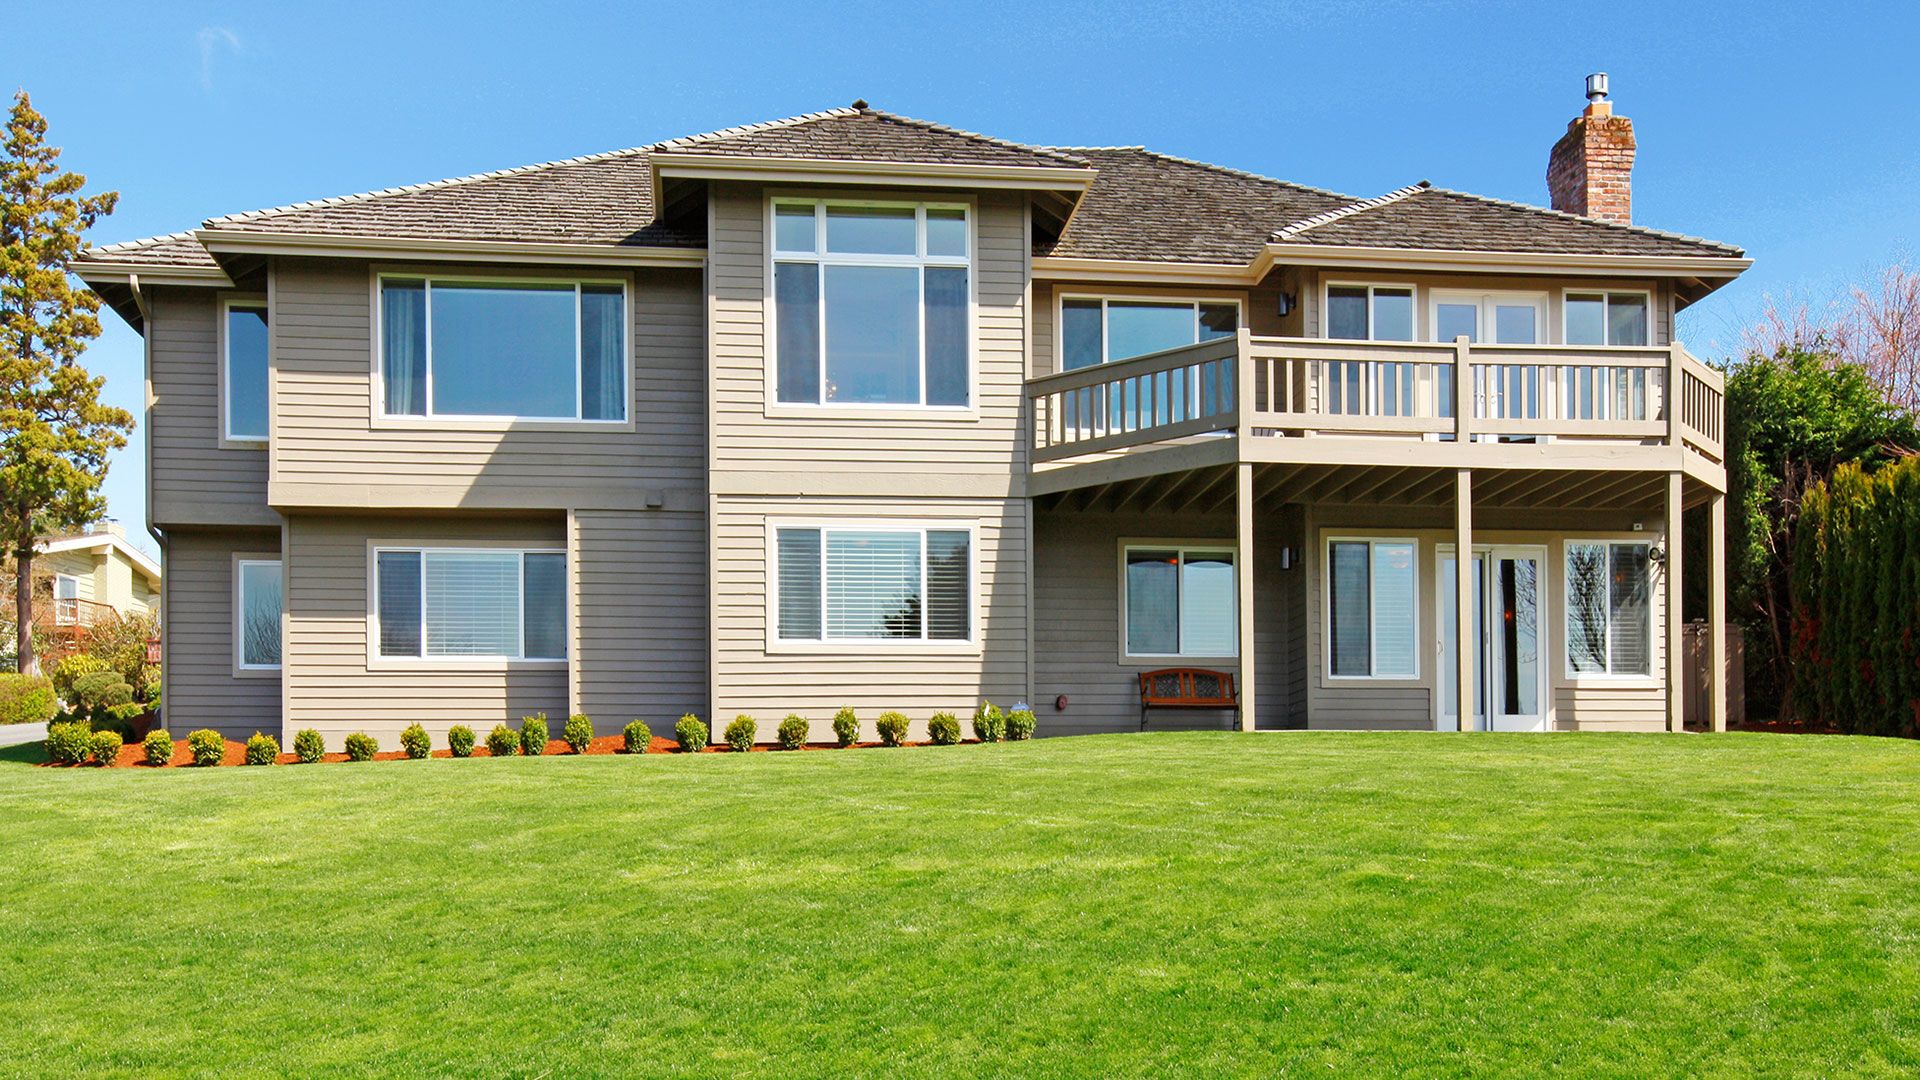 A home with regular lawn care and landscaping in Crestline, OH.